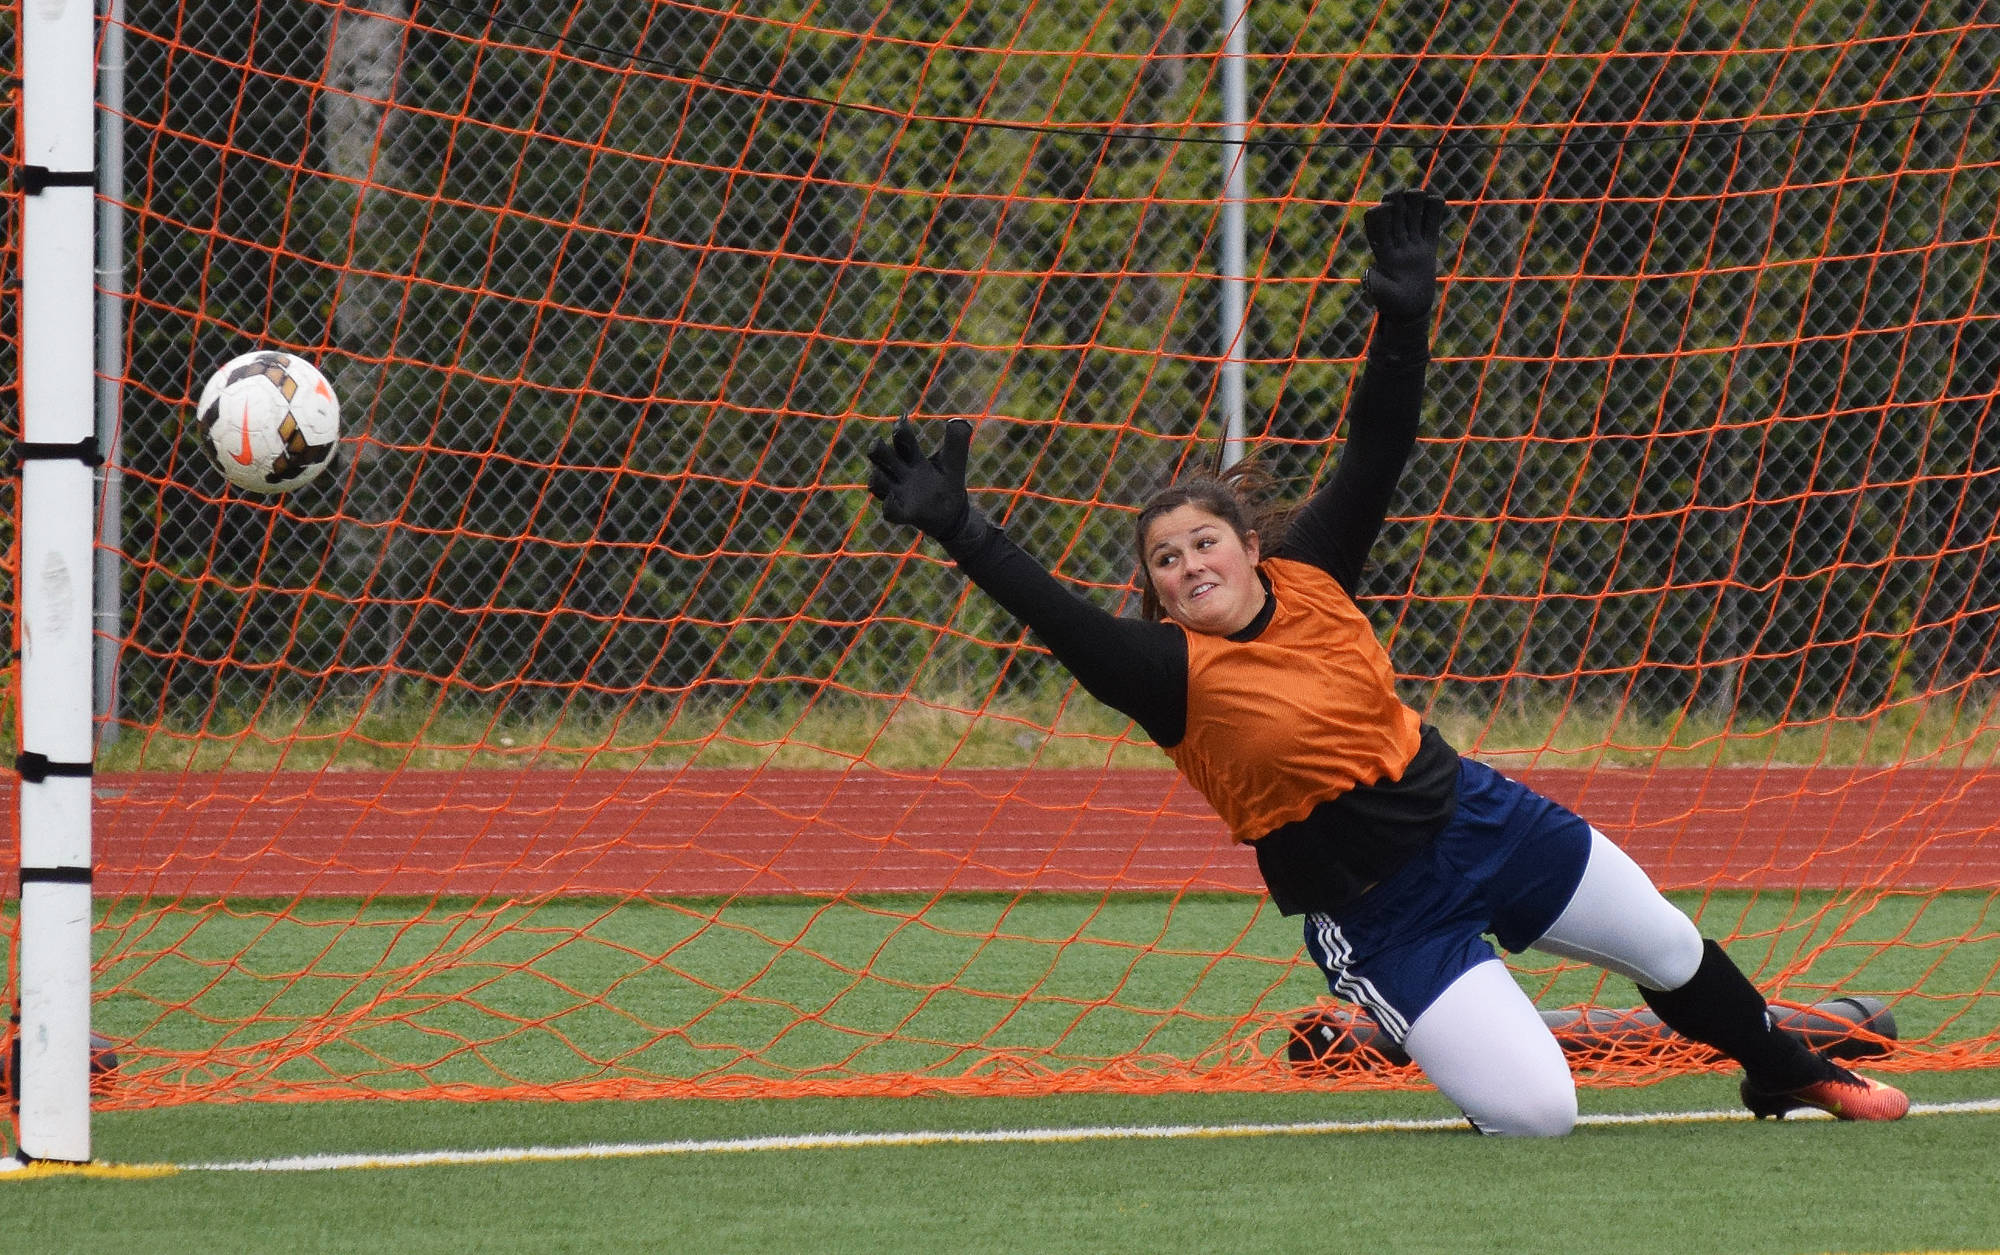 Soldotna goalie Maddie Kindred misses a penalty kick from Grace’s Maddy Morgan Friday in a Division II state tournament semifinal at Eagle River High School. (Photo by Joey Klecka/Peninsula Clarion)